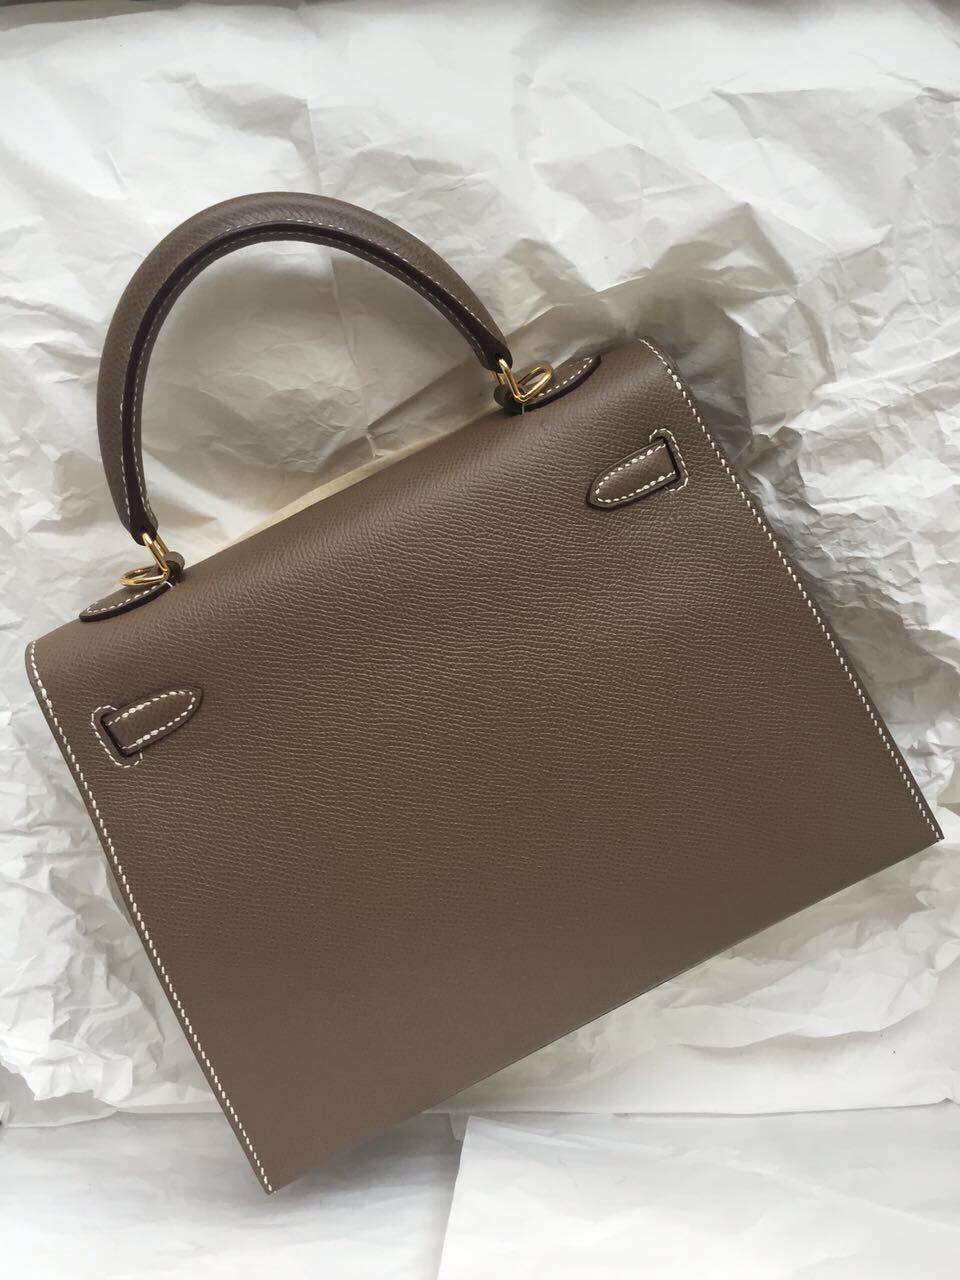 Discount Hermes Kelly Bag Sellier in Etoupe Grey Epsom Leather 25cm